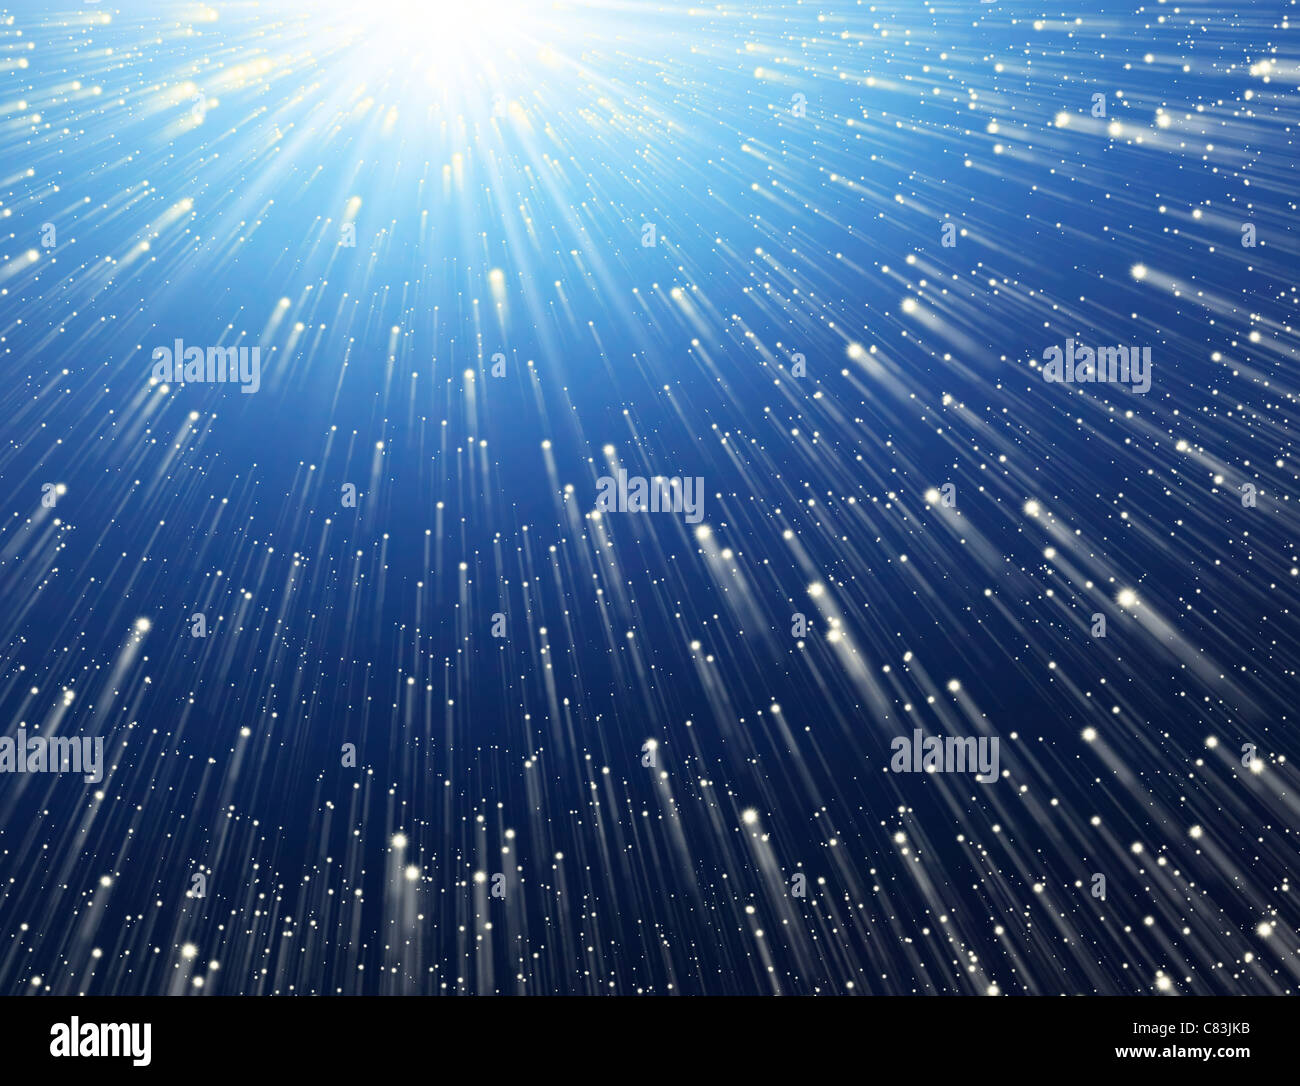 Abstract background. Points of light flying towards the Sun. Stock Photo